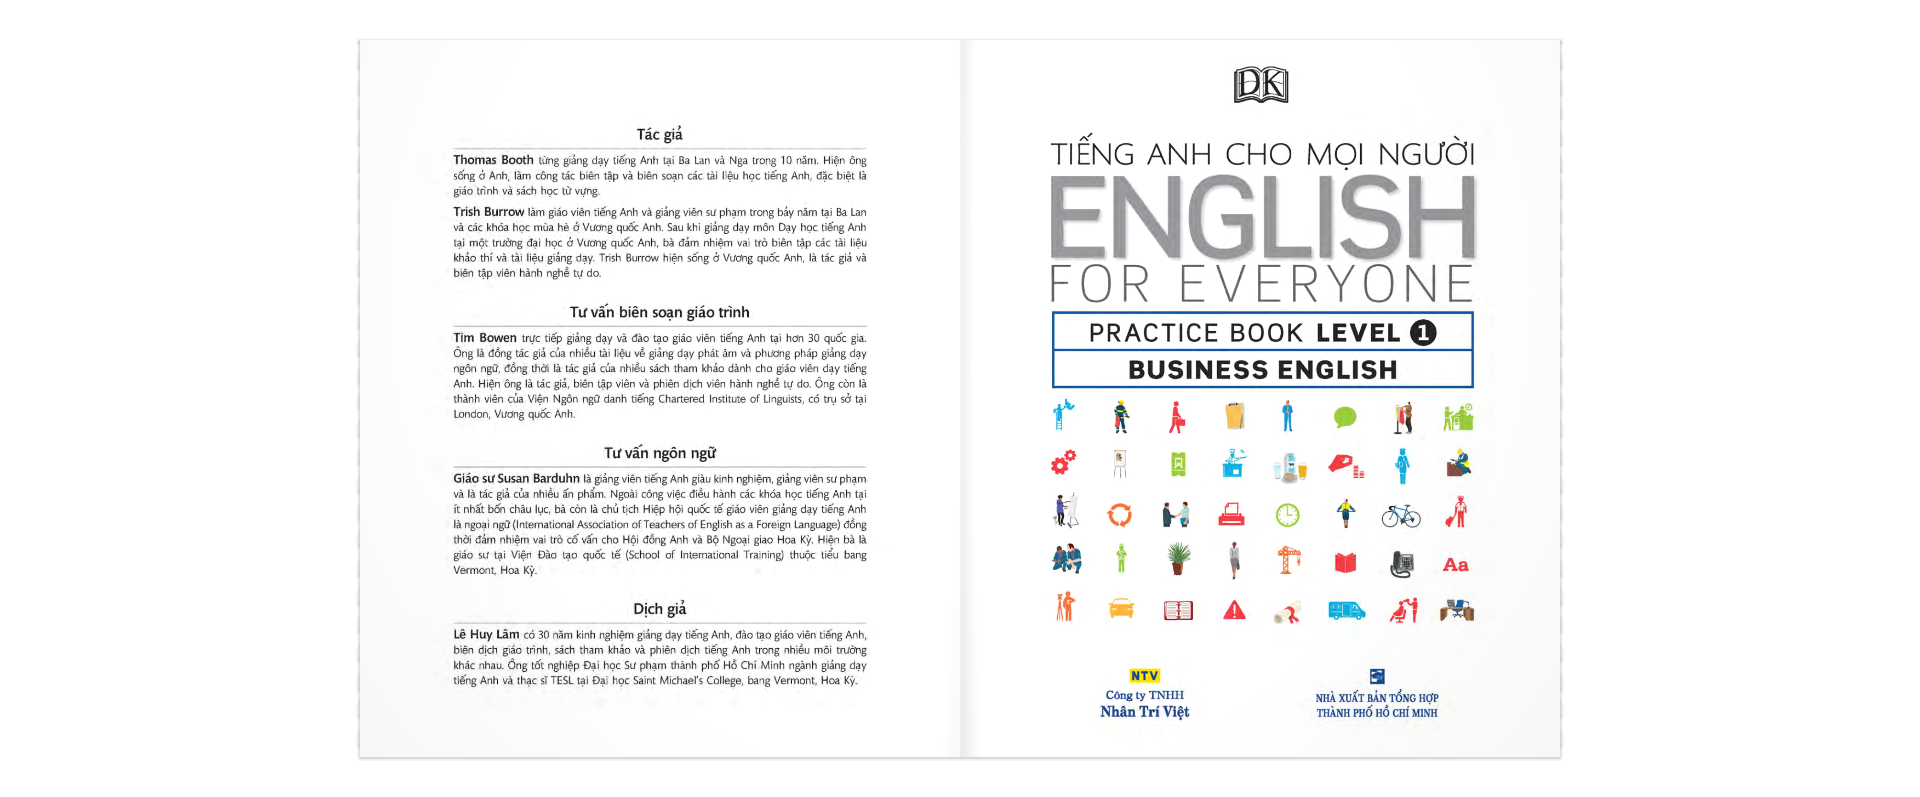 English For Everyone - Business English - Practice Book 1 CD PDF